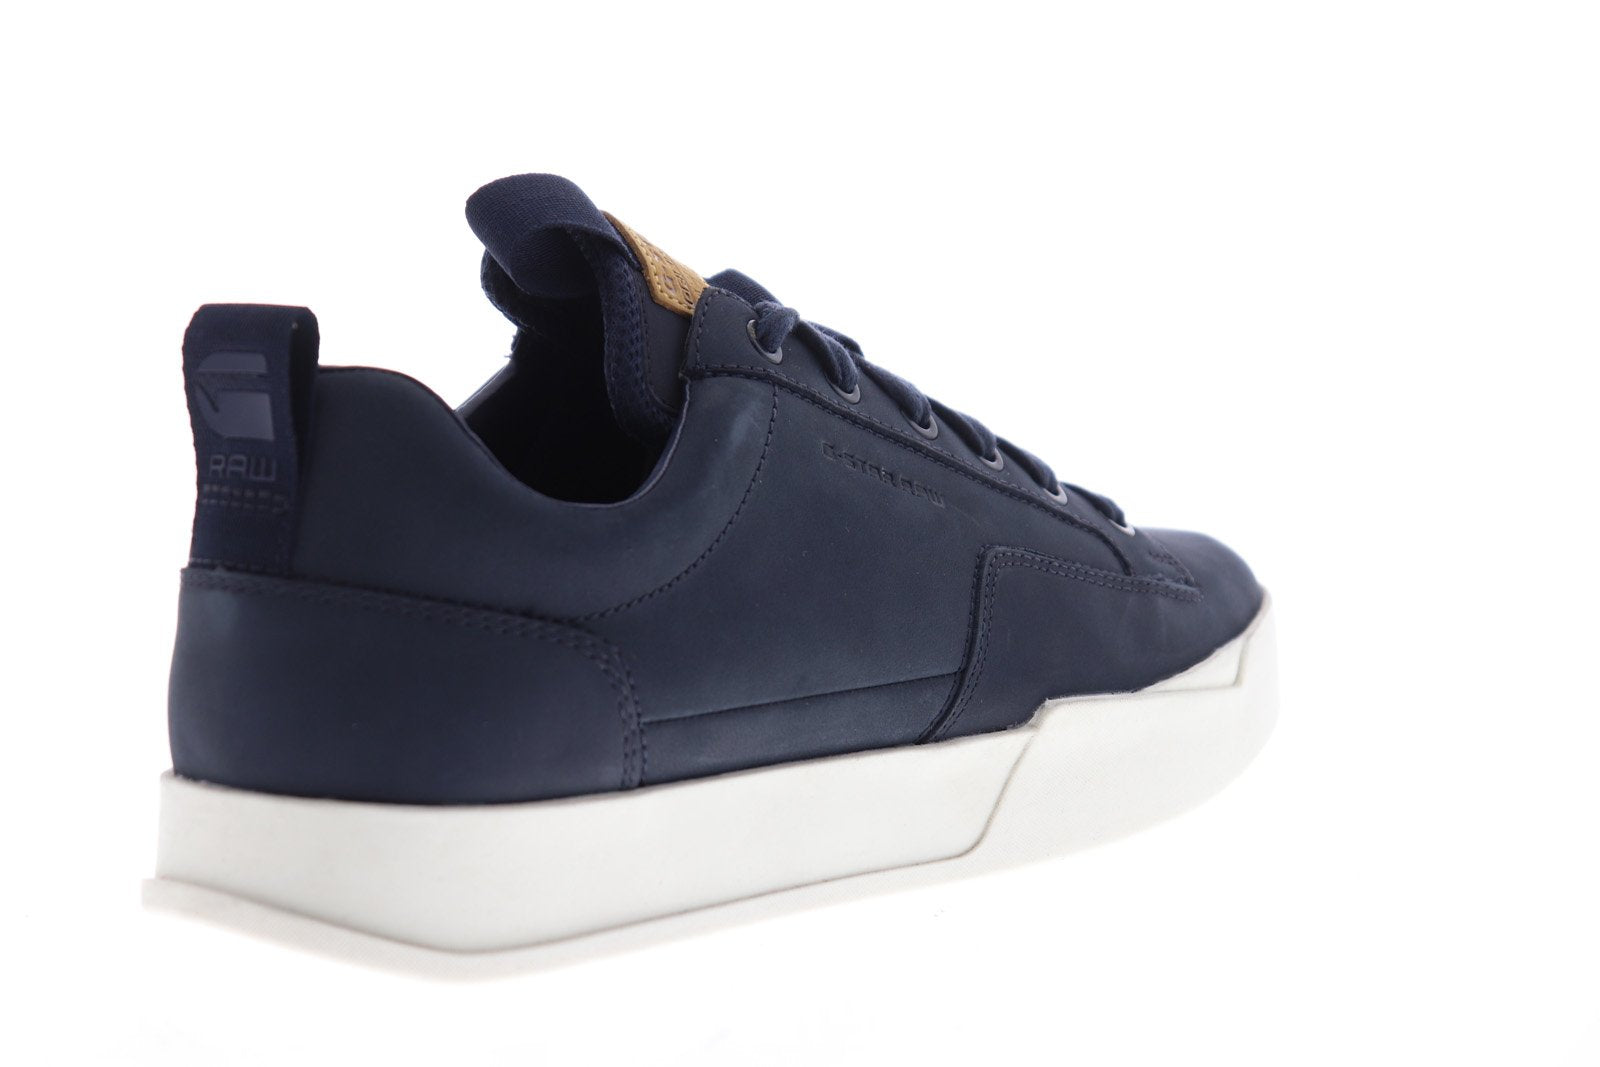 G-Star Raw Rackam Core Blue Leather Lifestyle Sneakers Sh - Ruze Shoes